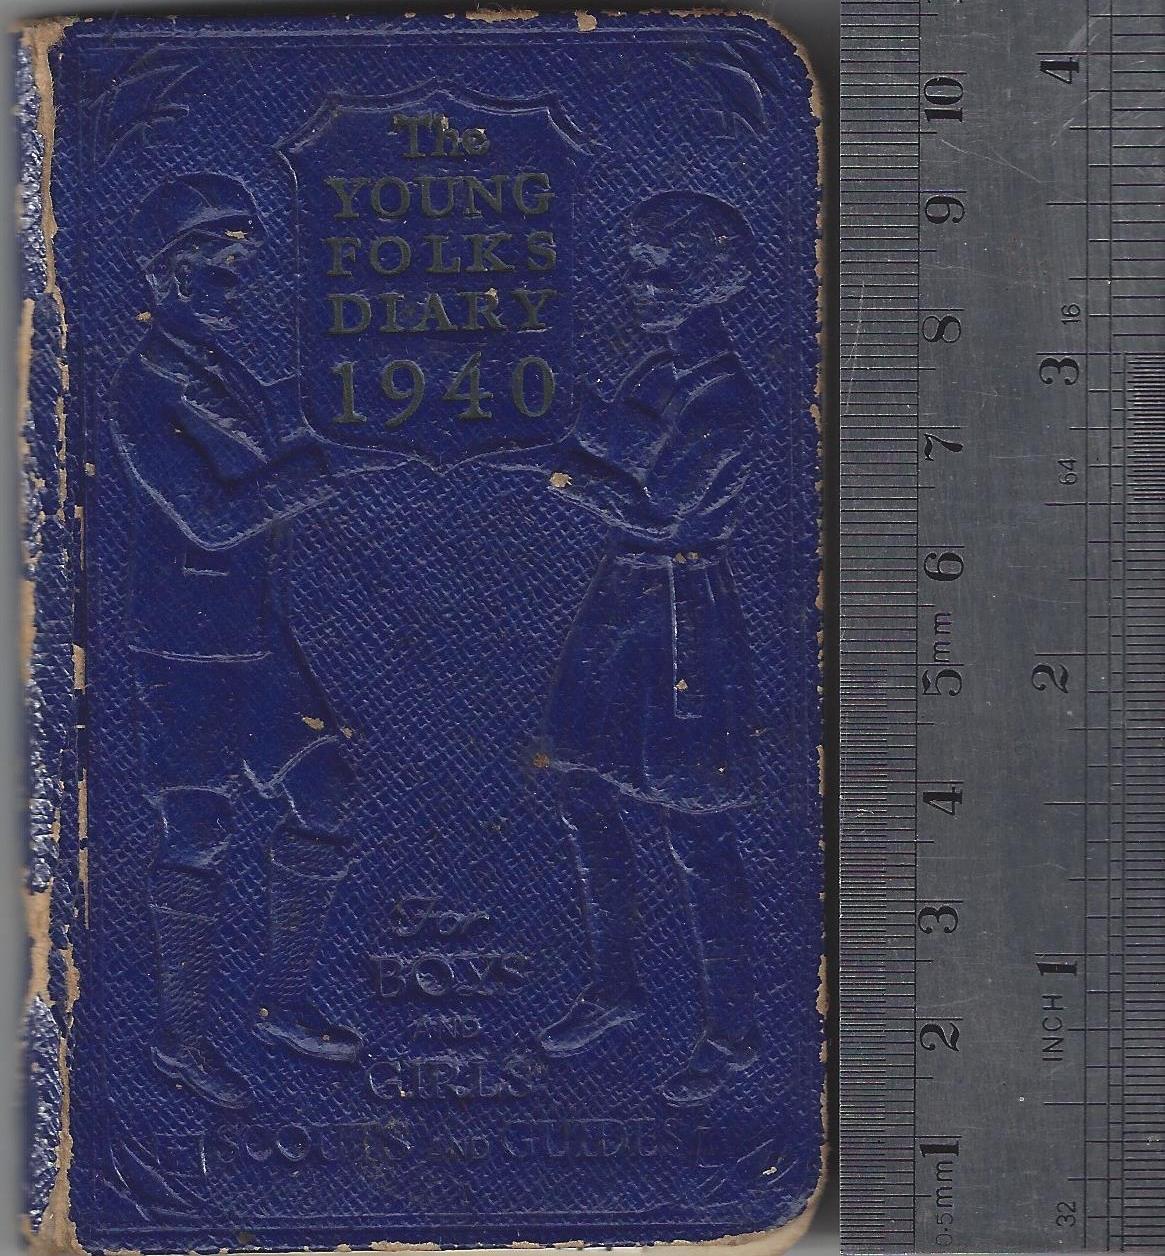   Photo of front cover of Heinrich Pfeil's diary 1940-41